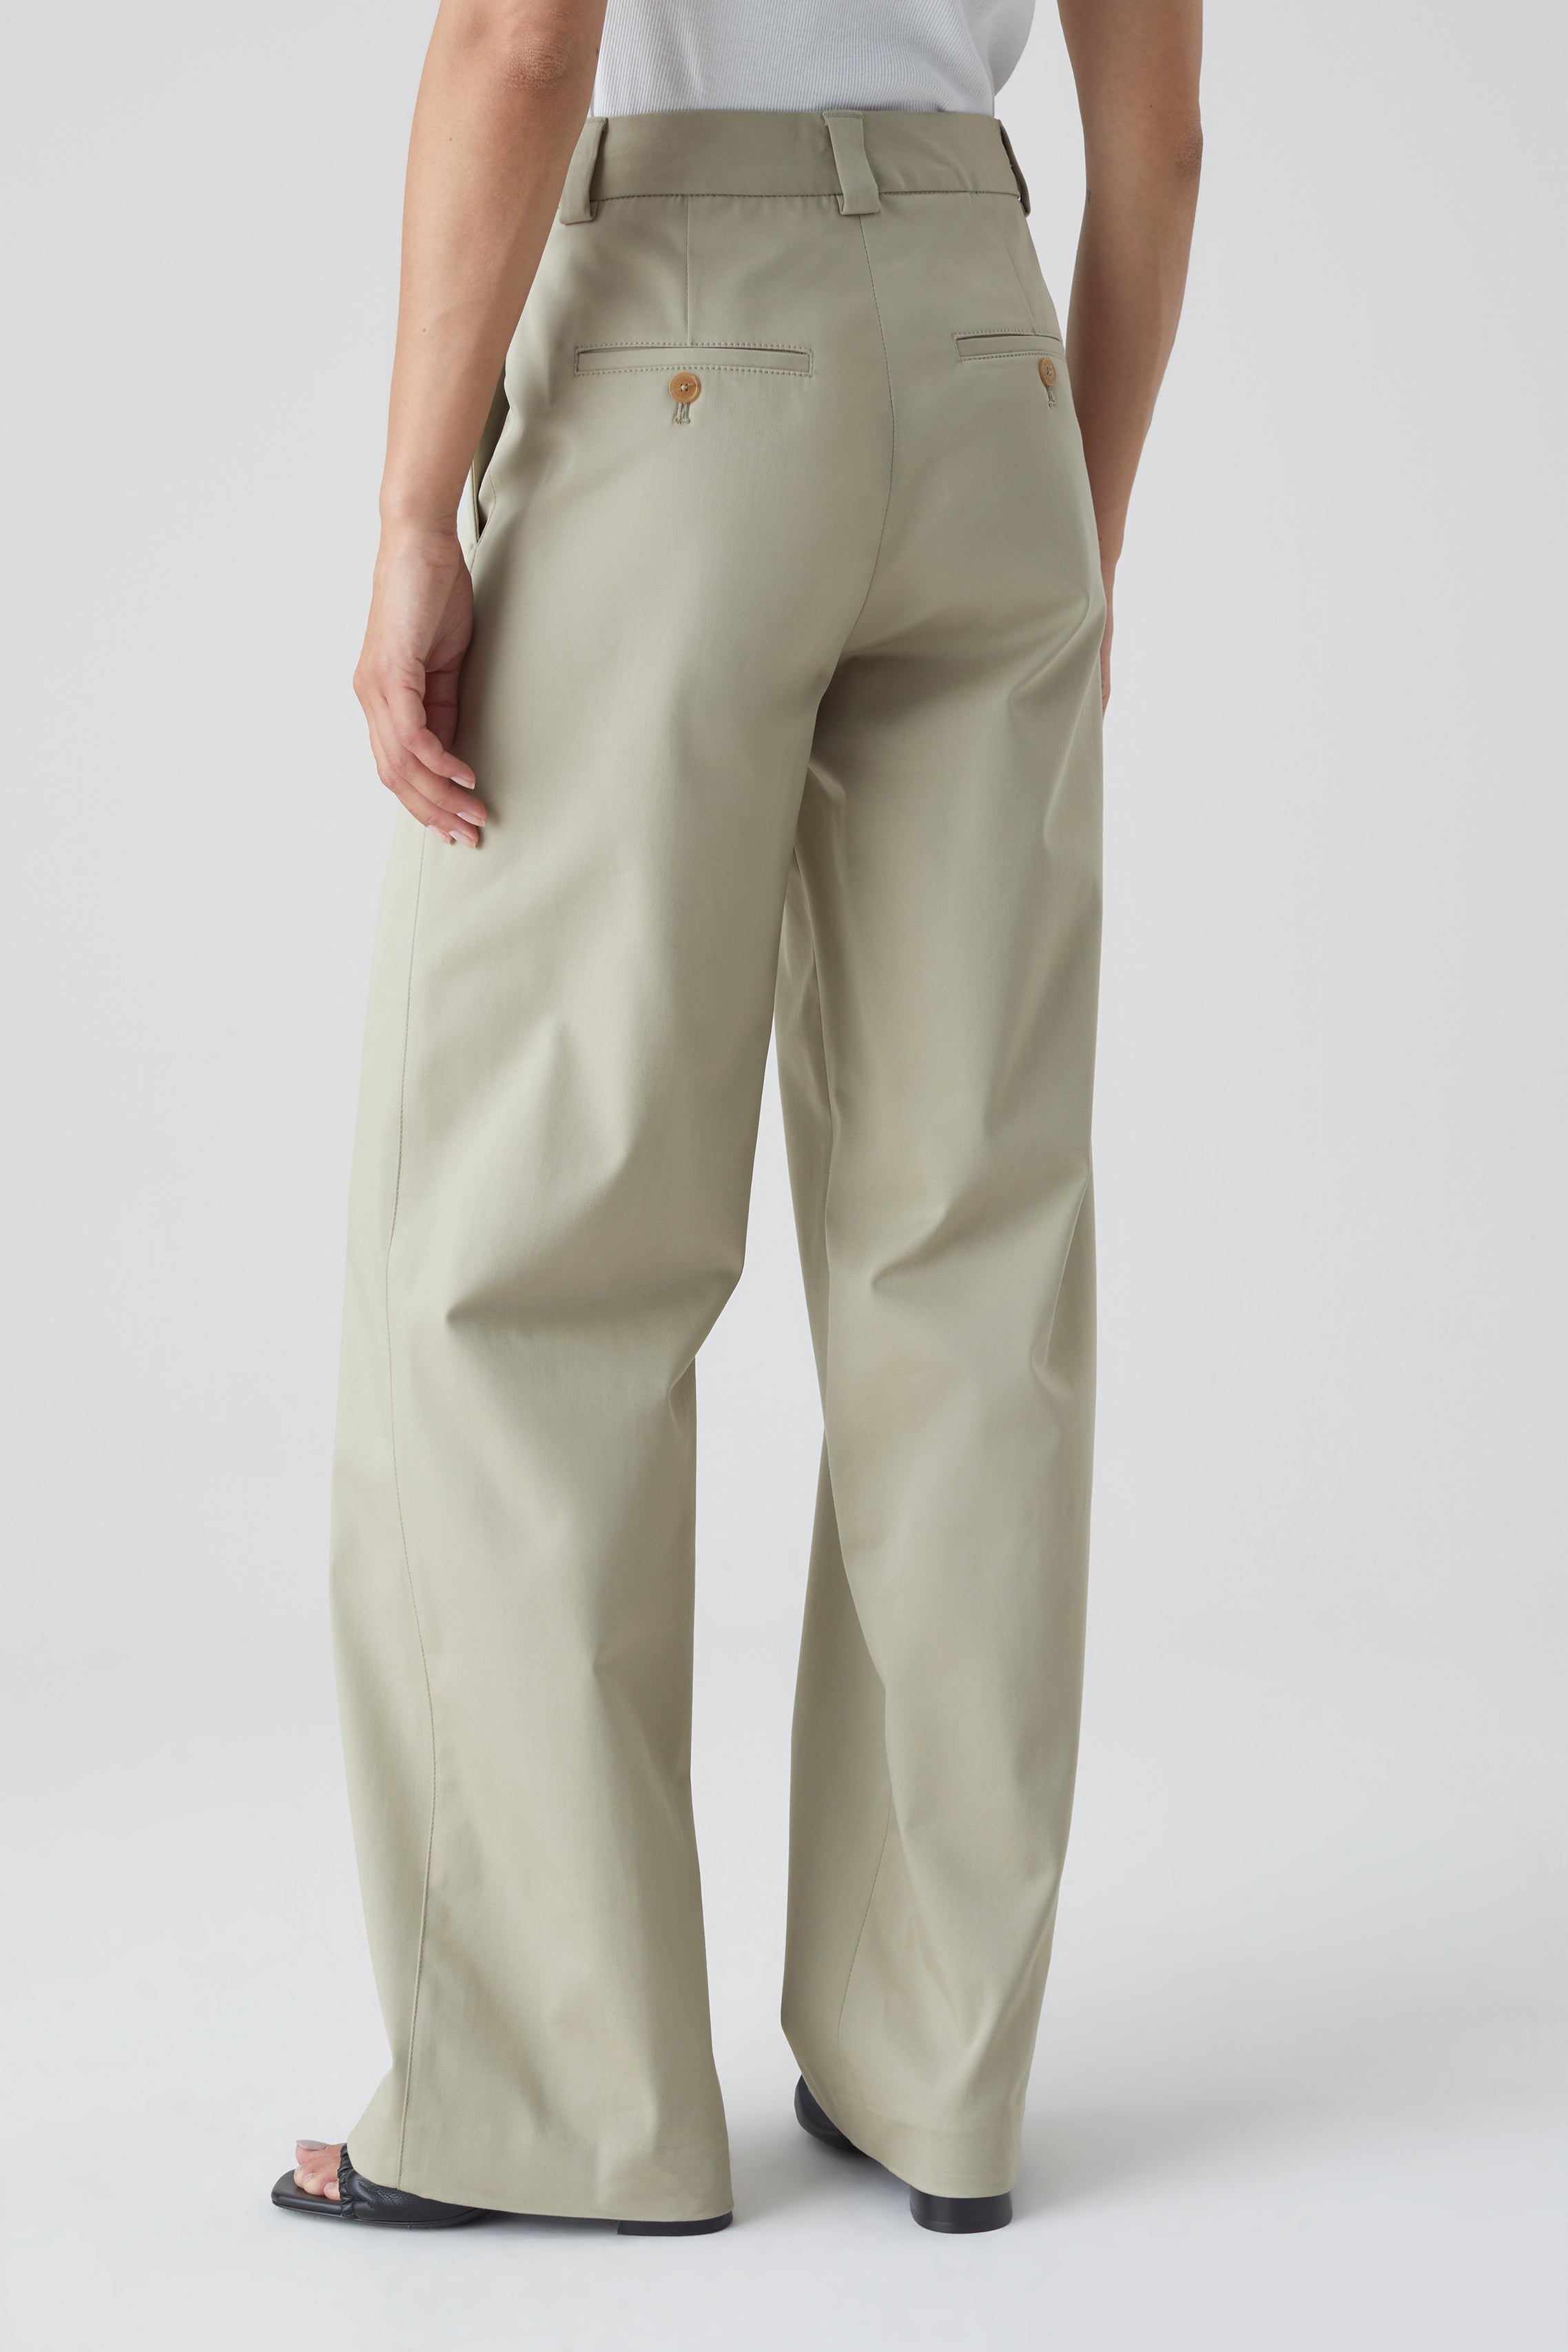 CLOSED-OUTLET-SALE-STYLE-NAME-BROOKS-PANTS-Hosen-ARCHIVE-COLLECTION-3_a0806090-ff02-4e15-b7d6-21dd0f0d760f.jpg